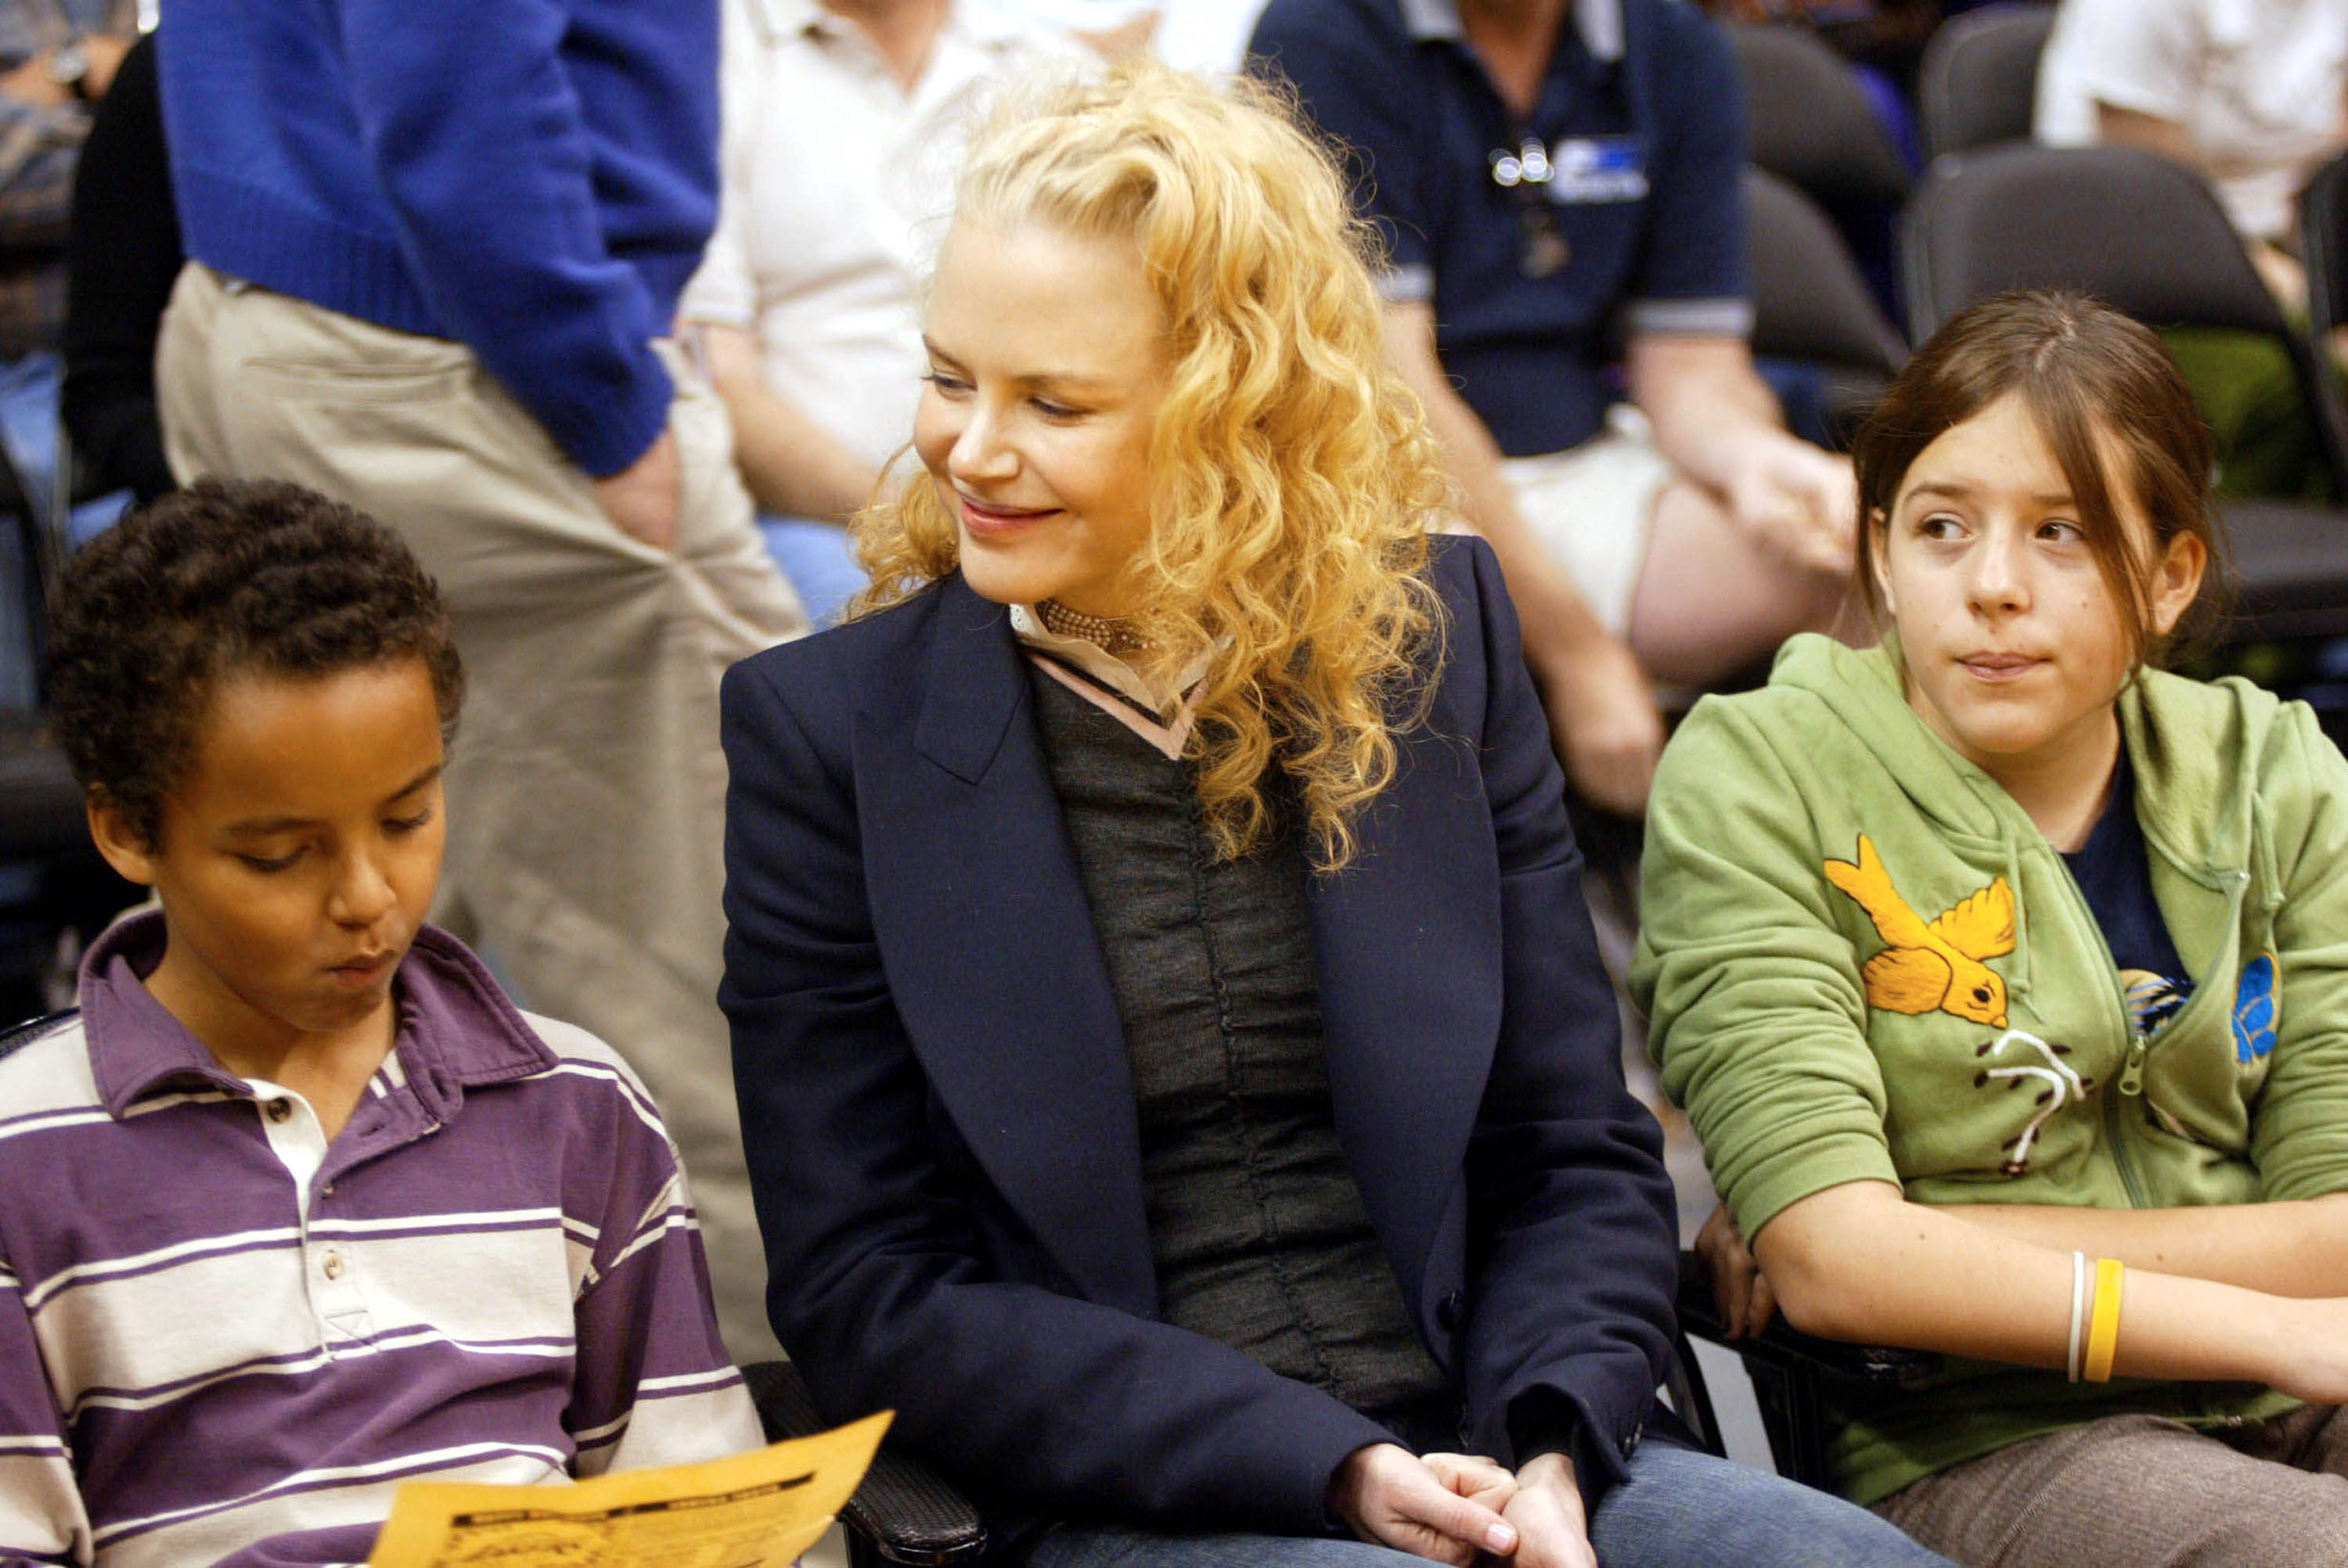 Nicole Kidman with Connor Cruise and Isabella Cruise attend a game between the Los Angeles Lakers and the Miami Heat at the Staples Center December 25, 2004 in Los Angeles, California | Source: Getty Images